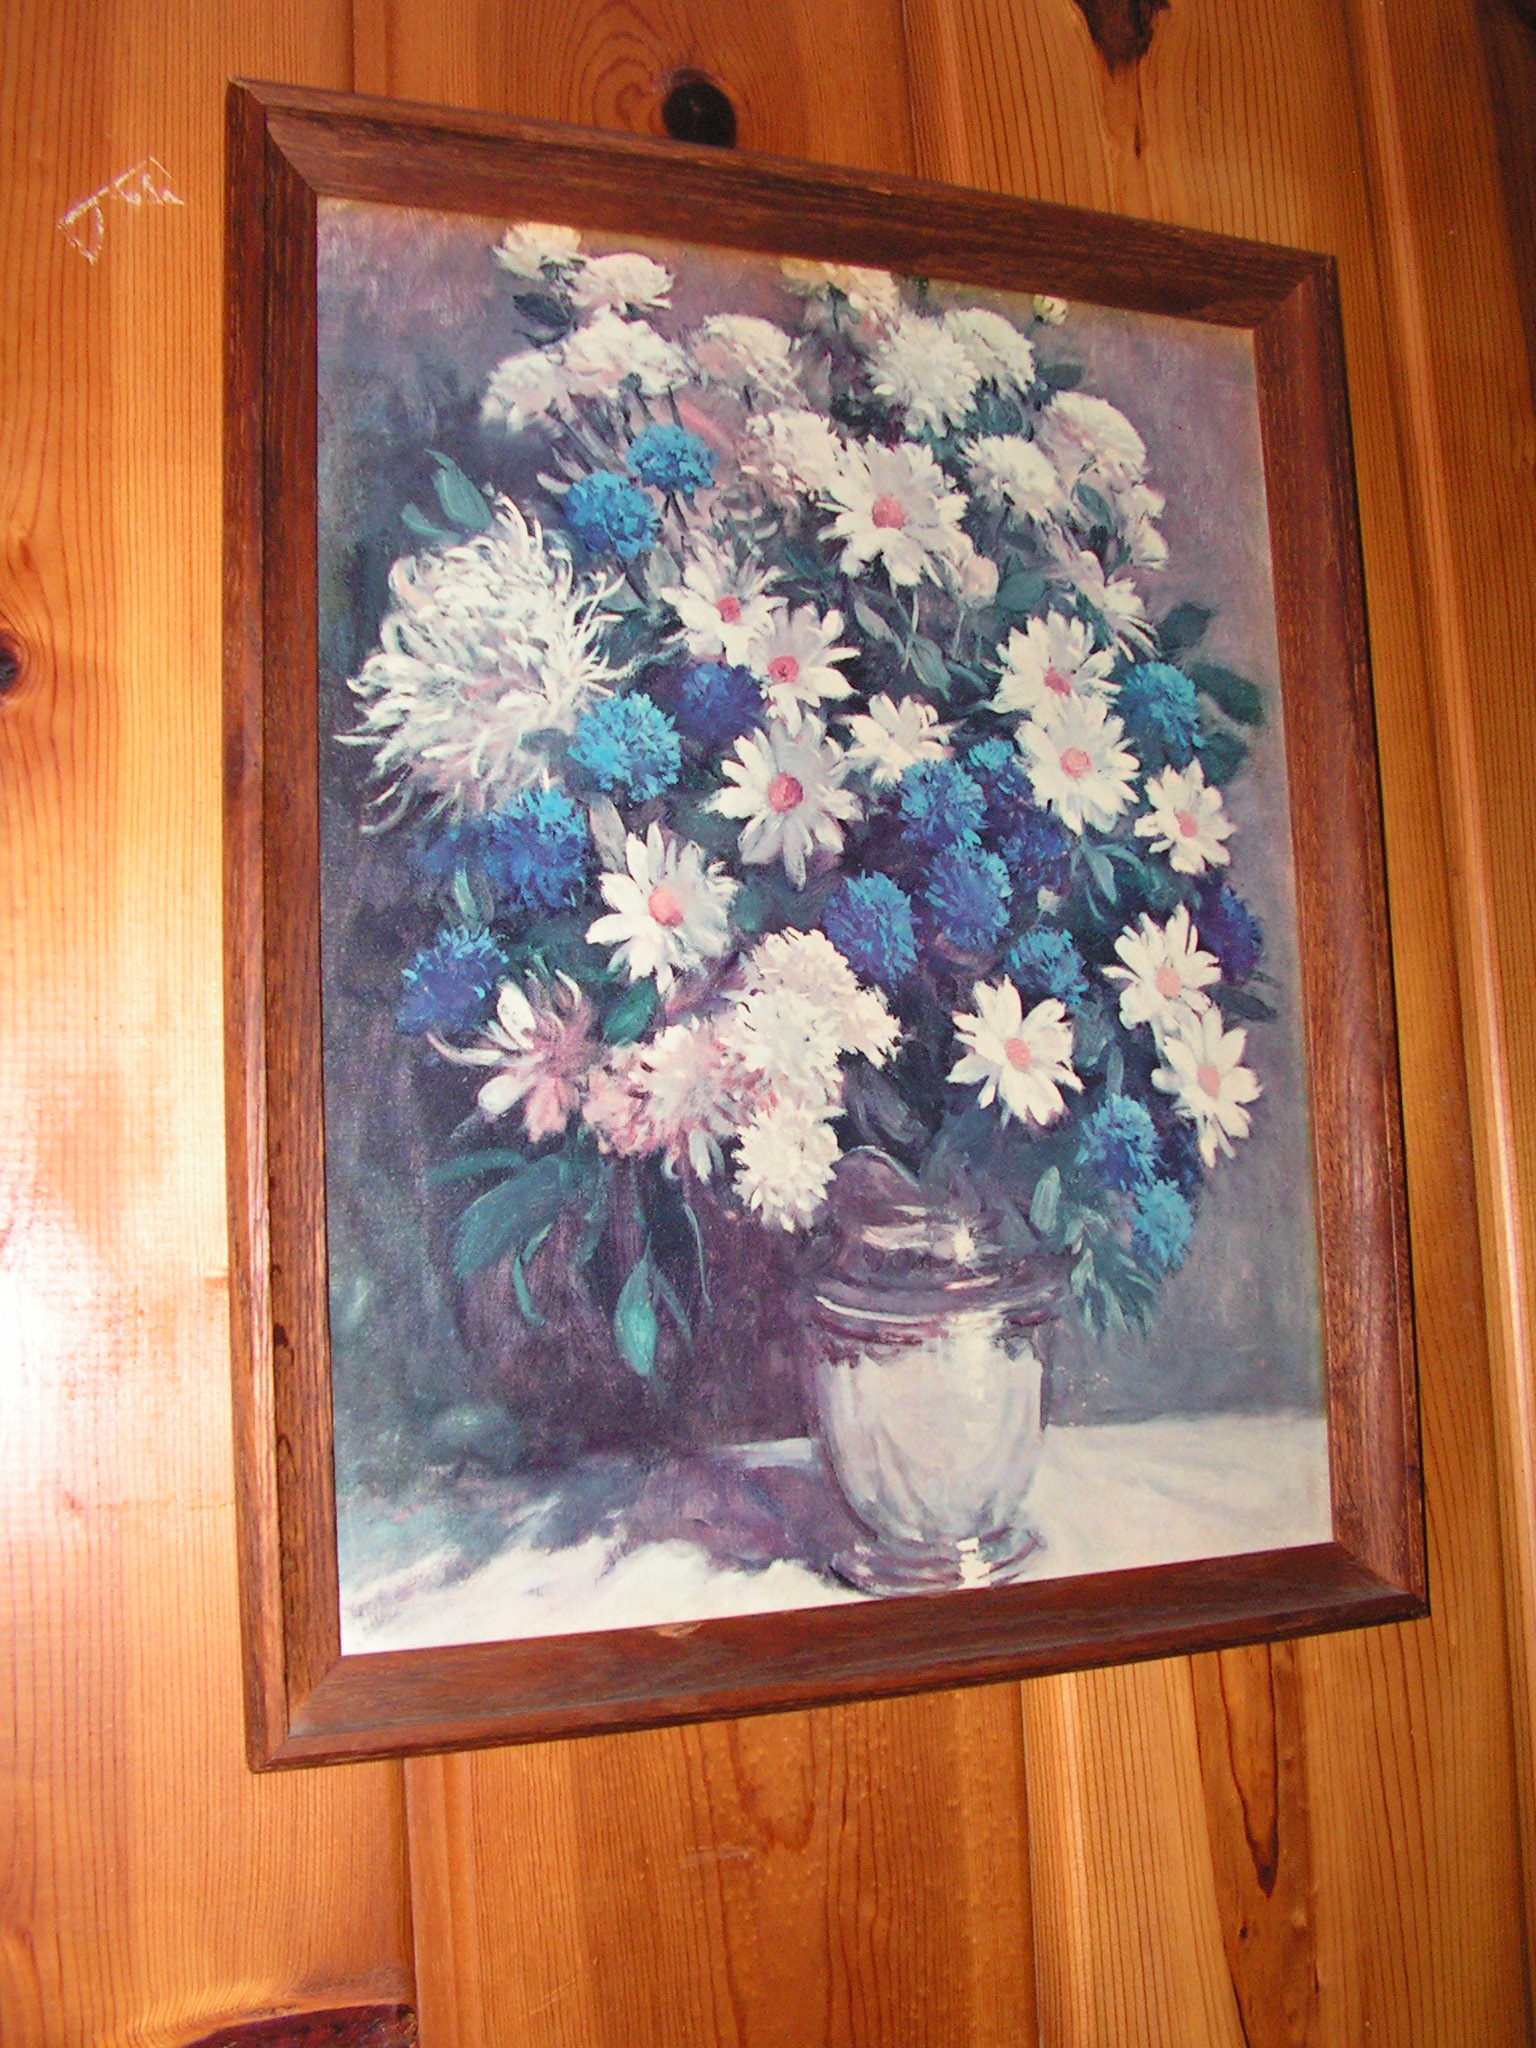 22\" x 17\" Painting (floral) in wood frame